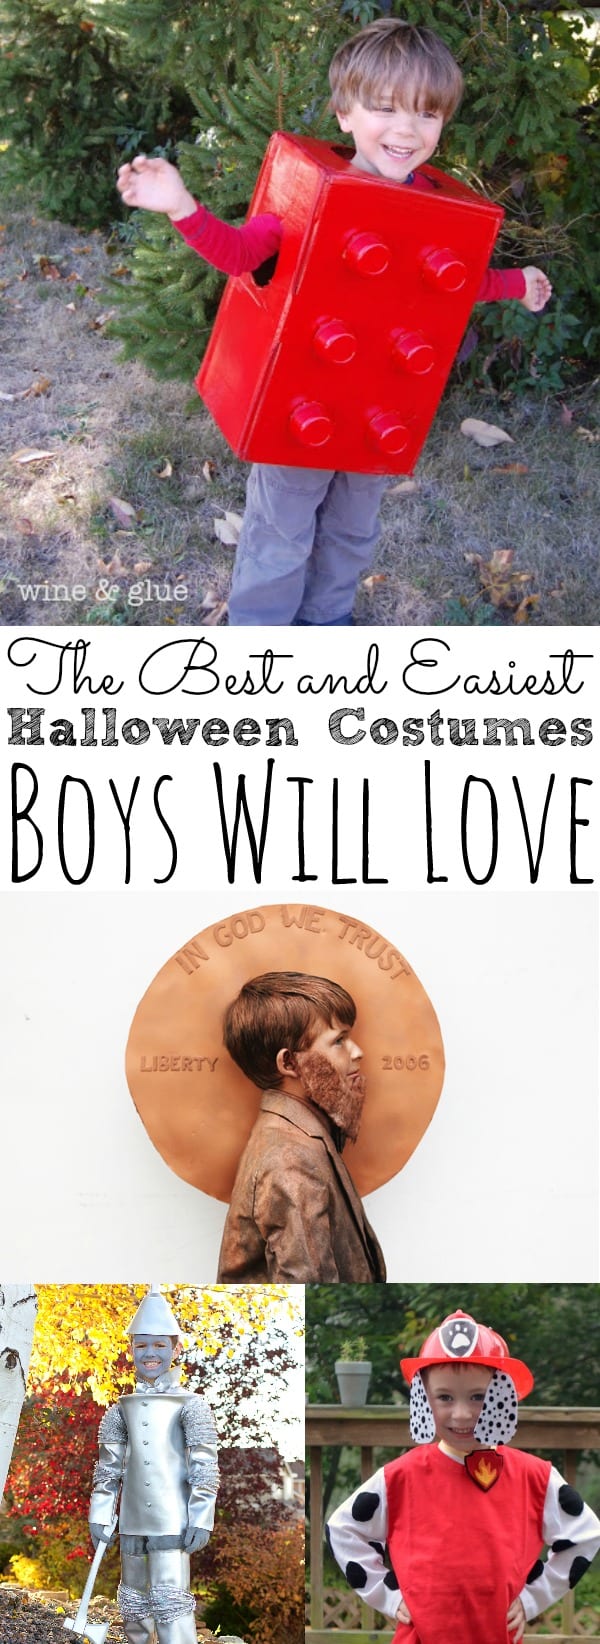 Awesome DIY Halloween Costumes for Boys